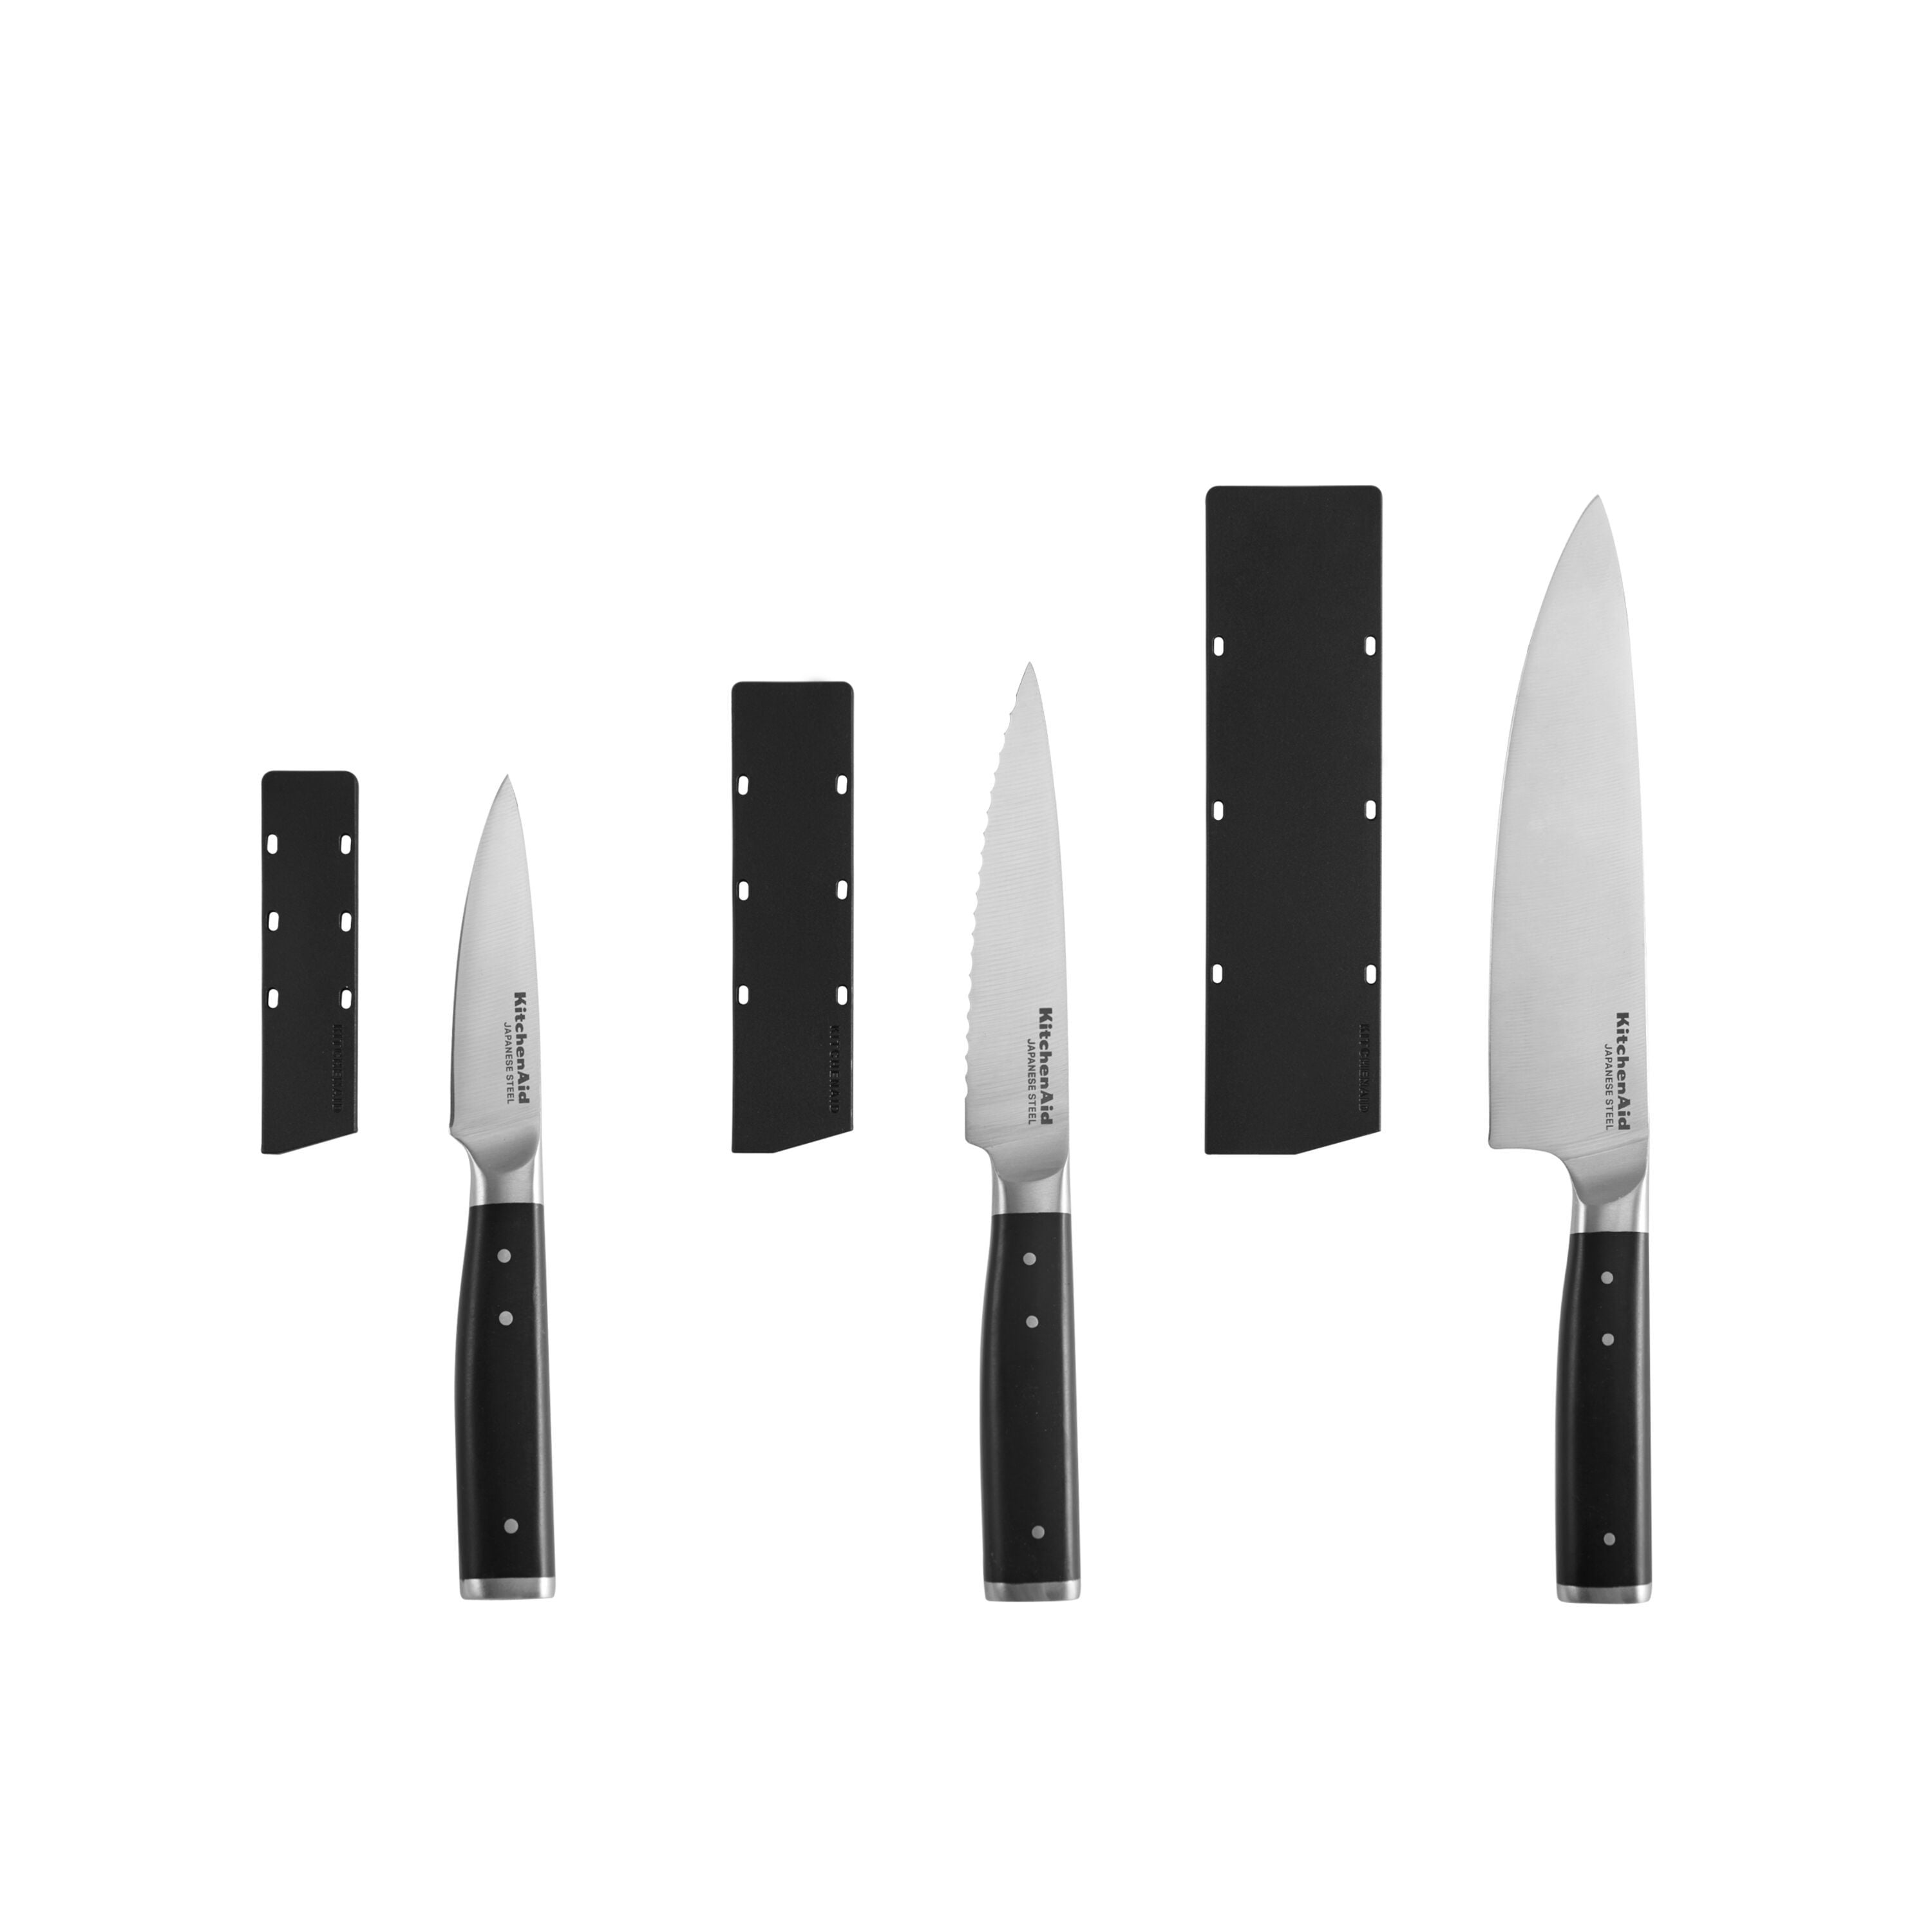 Rædsel Bloodstained Credential Kitchenaid Gourmet 3-piece Forged Tripe-Riveted Chef Knife Set with Blade  Covers, Black - Walmart.com